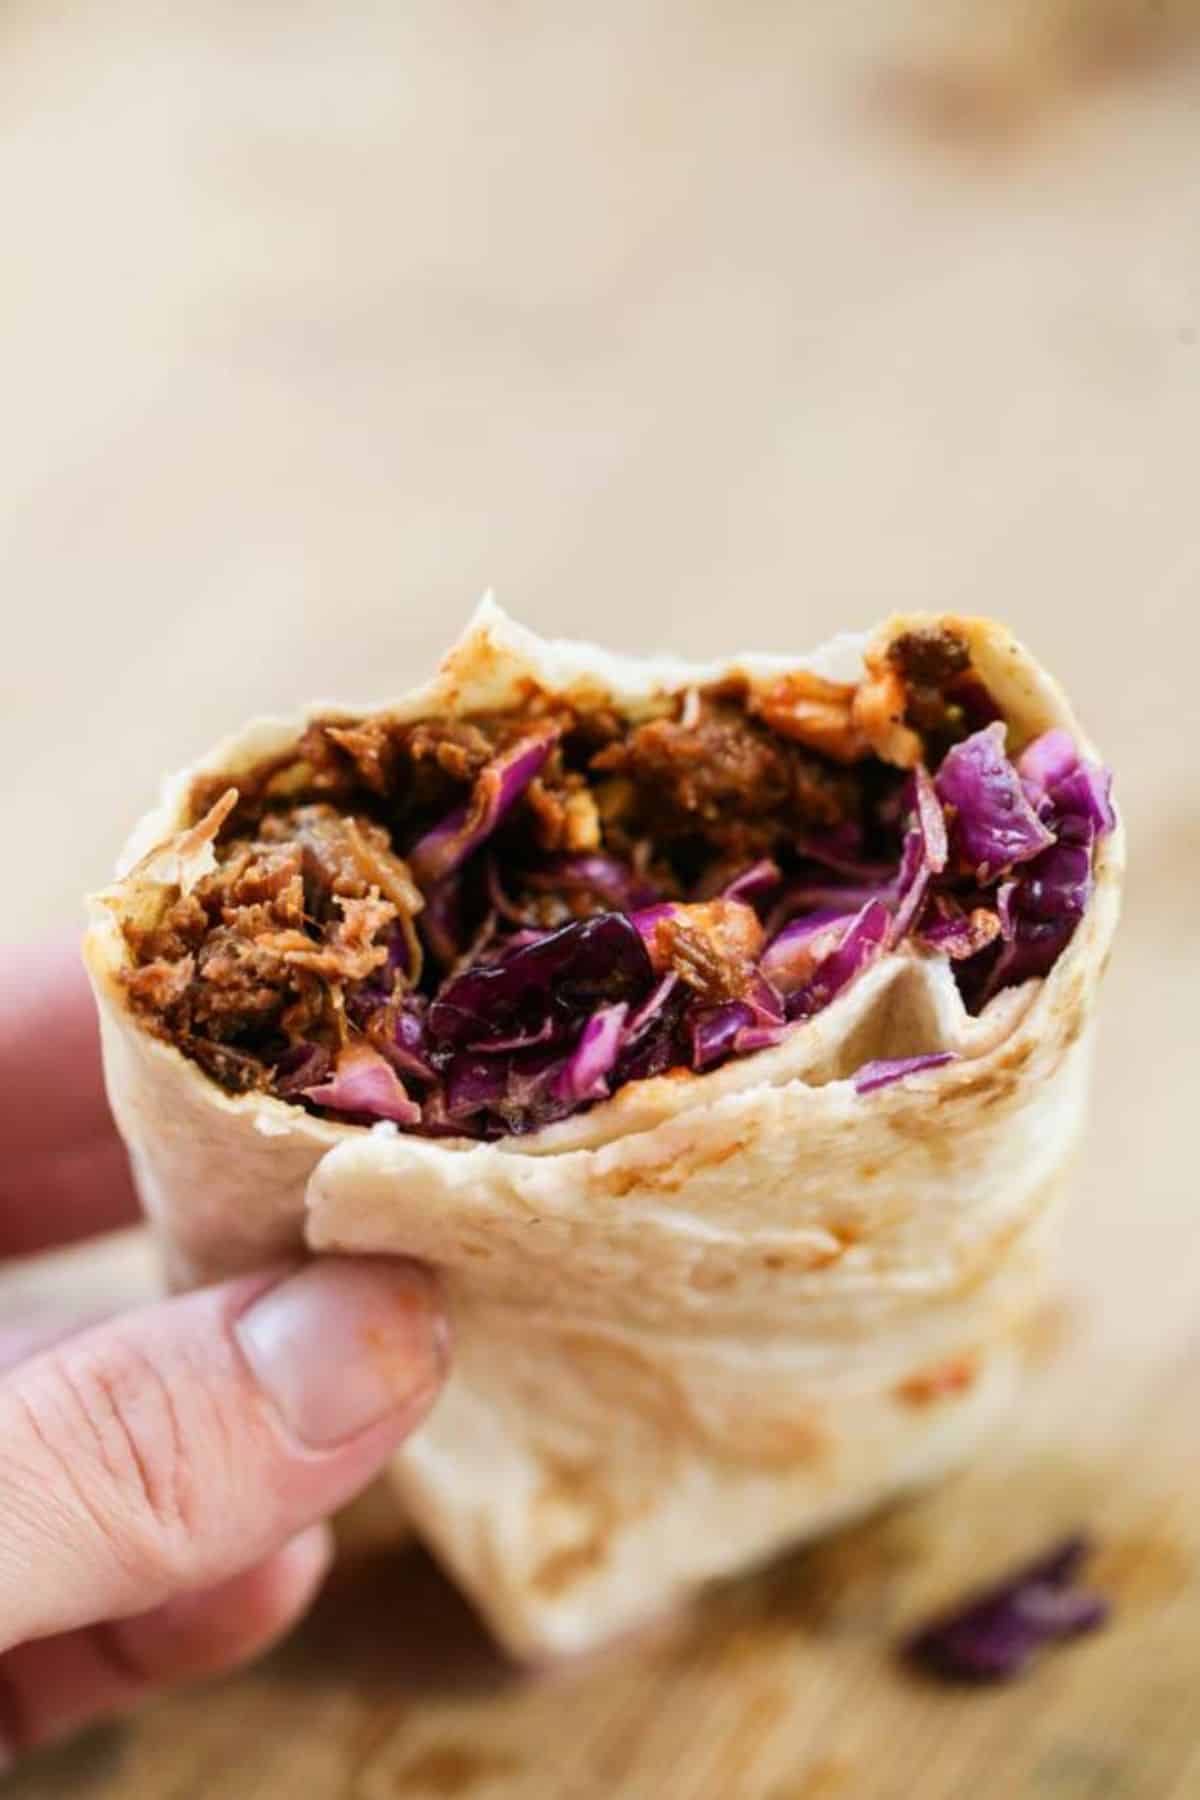 Flavorful pulled venison wrap held by hand.